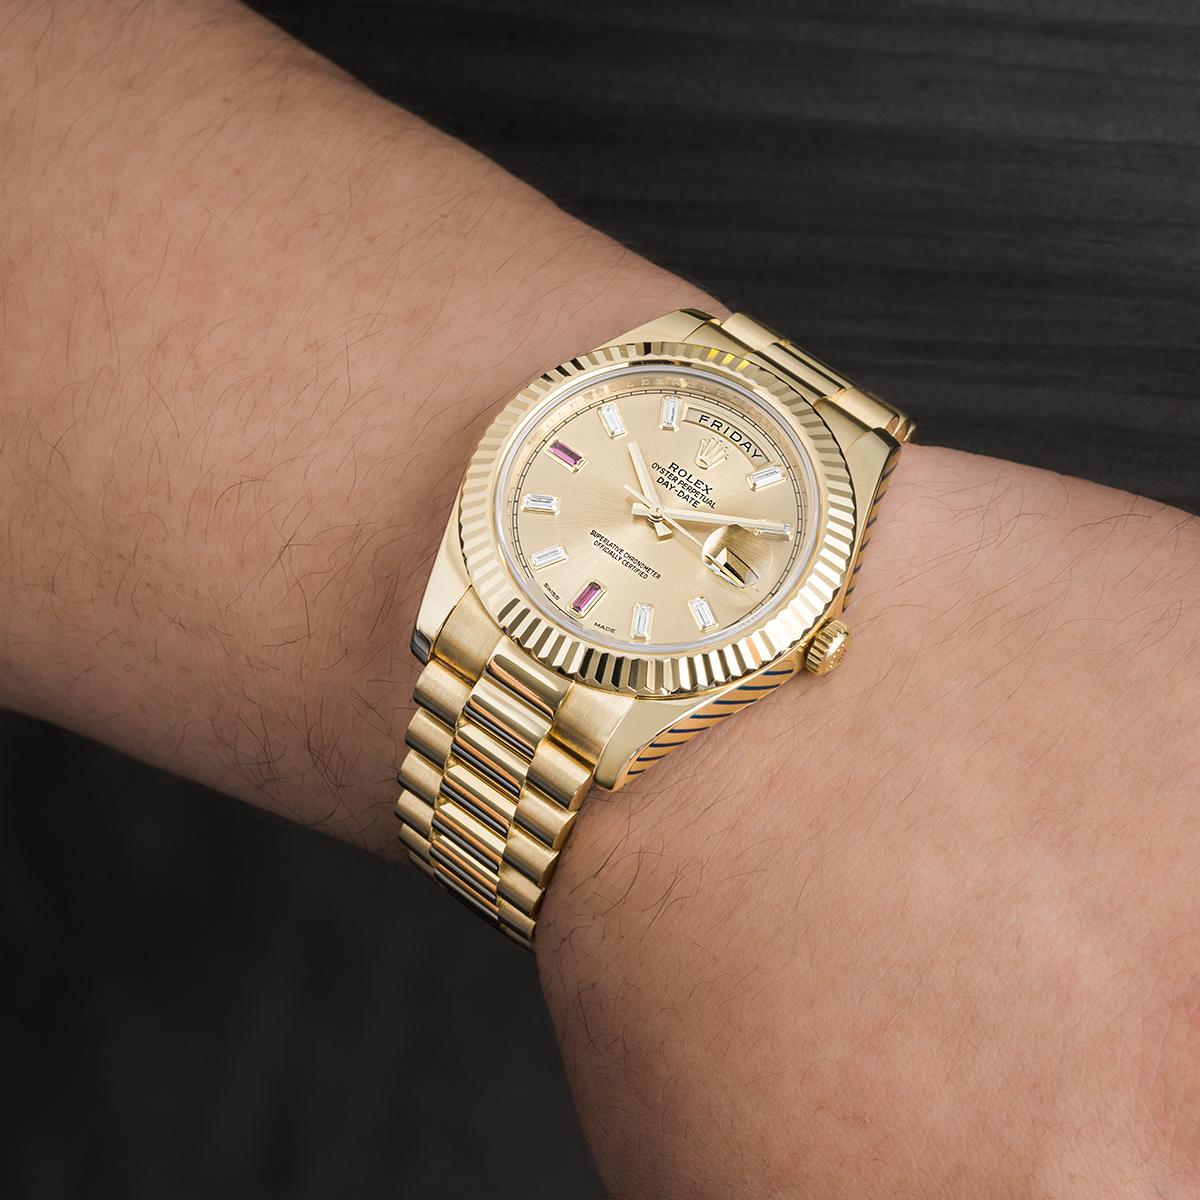 Rolex Day-Date II Diamond & Ruby Dial 218238 For Sale 1